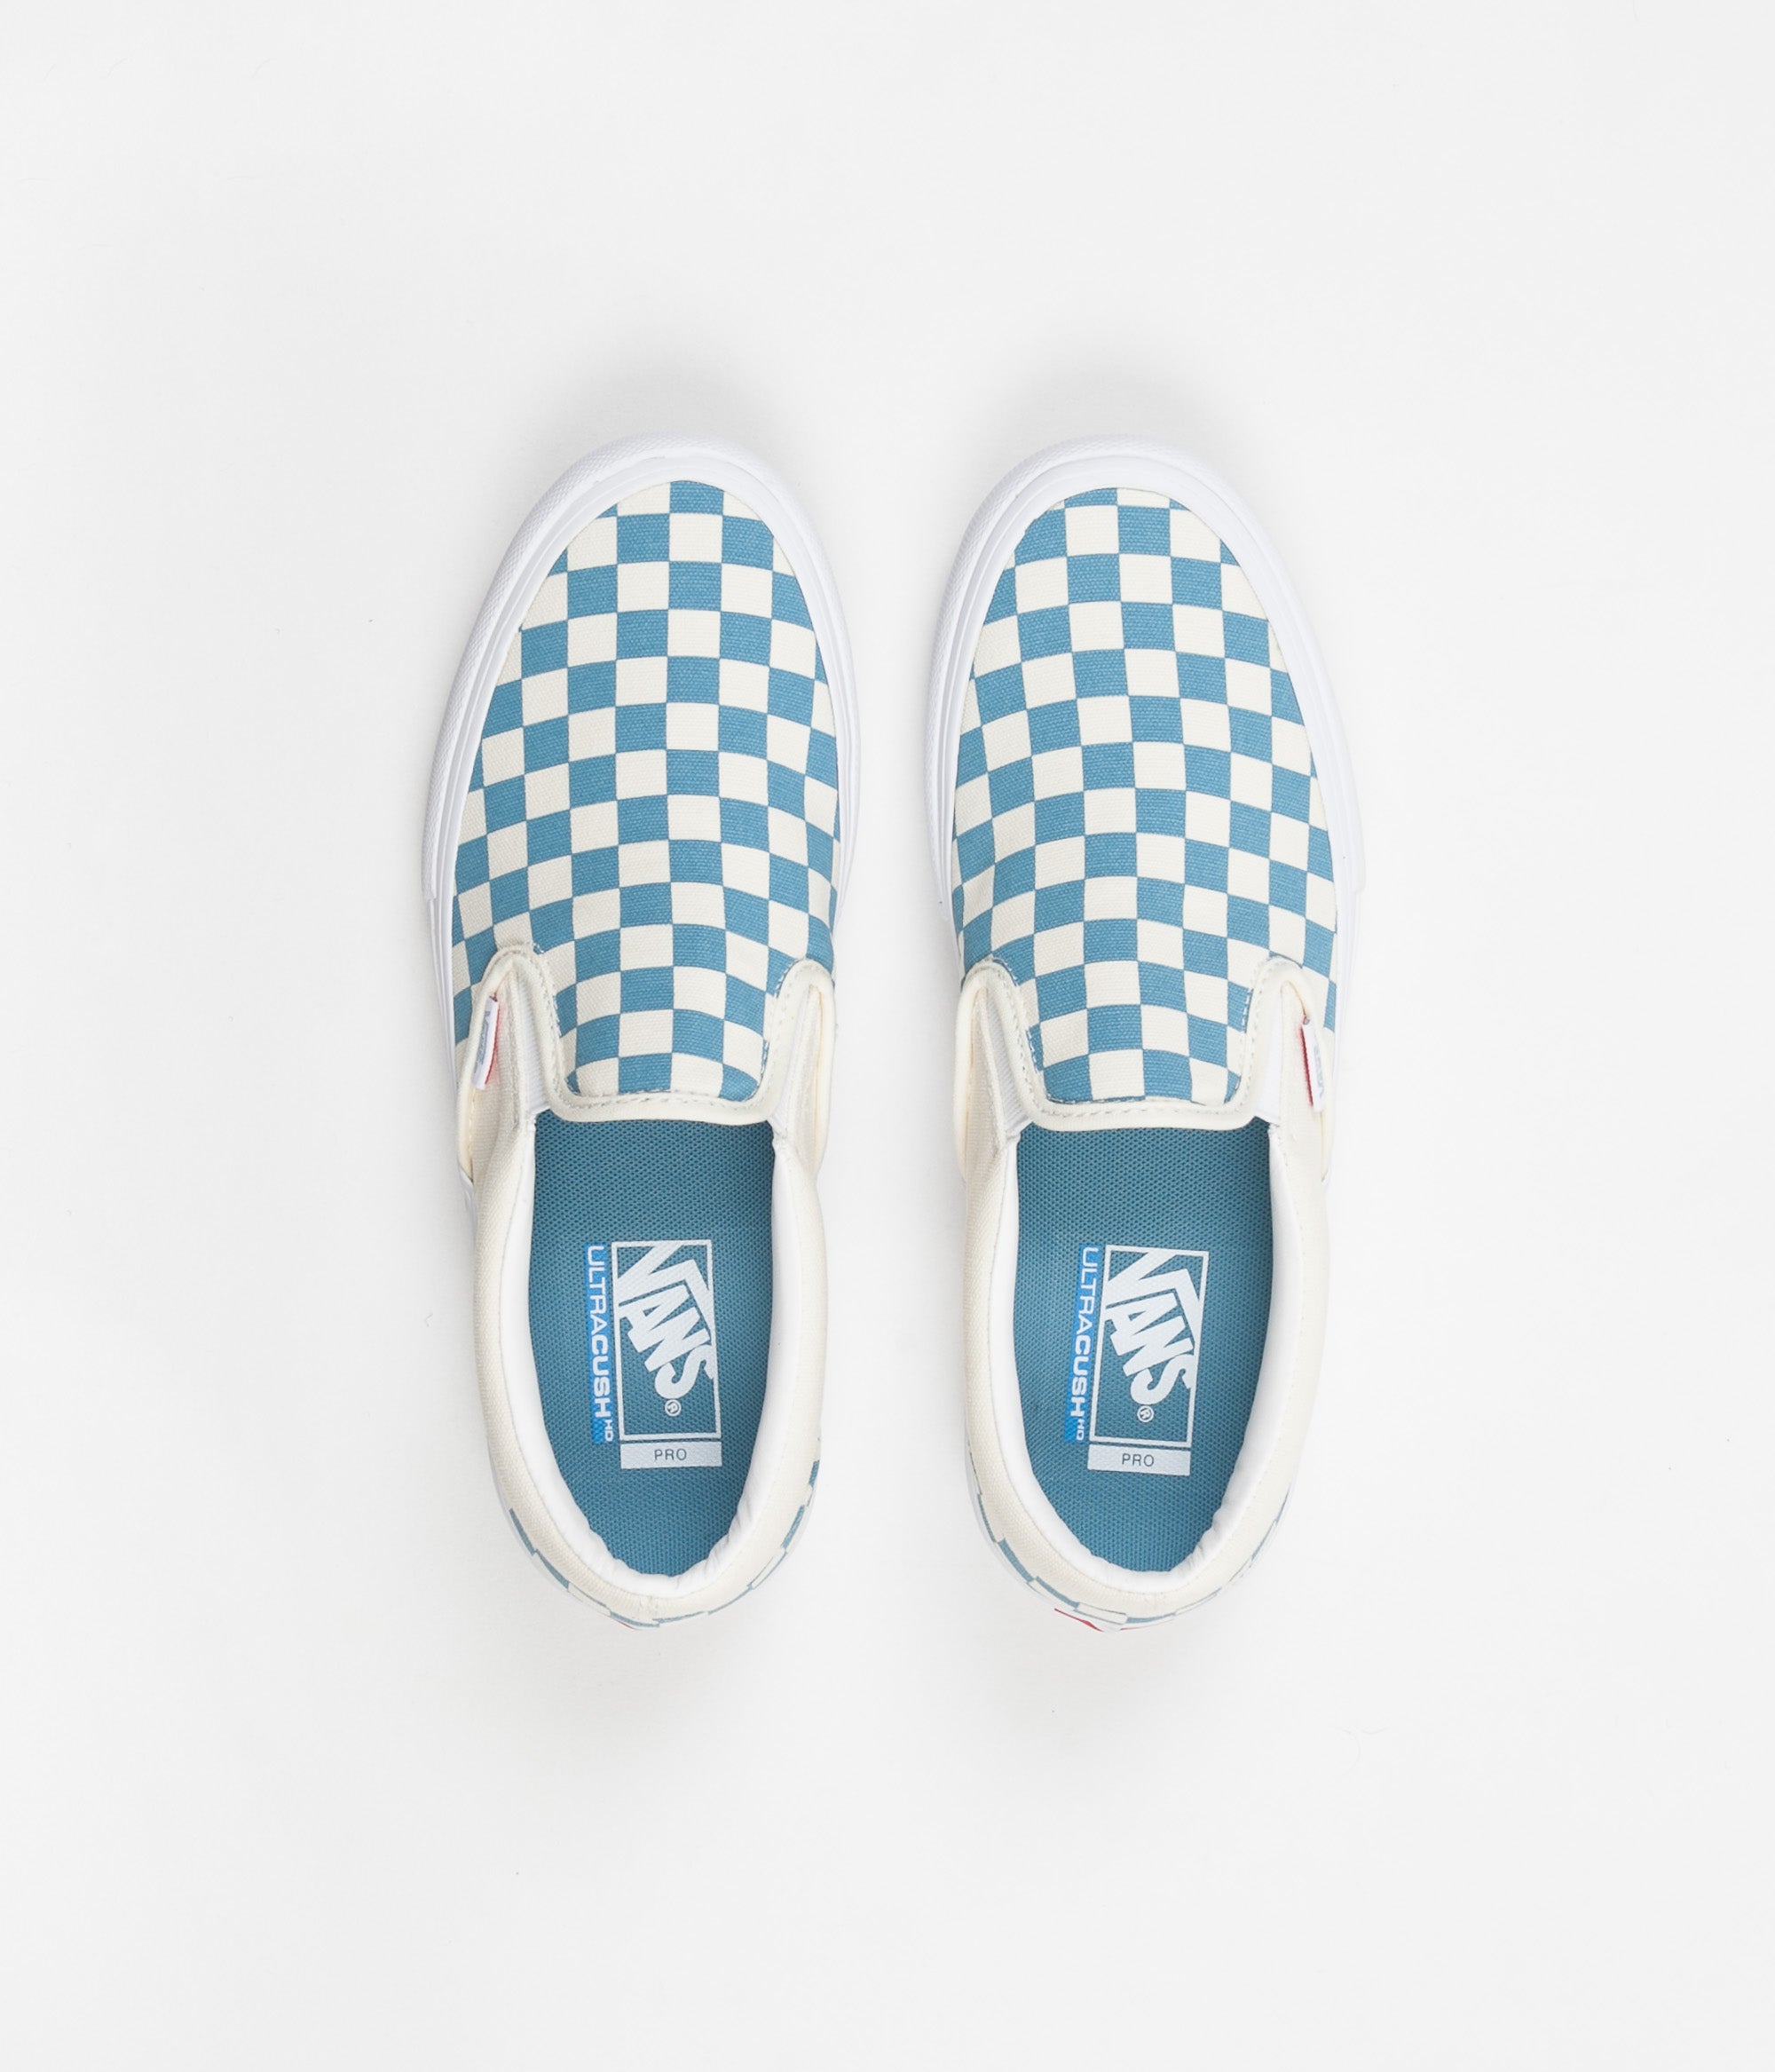 vans blue and white checkered shoes